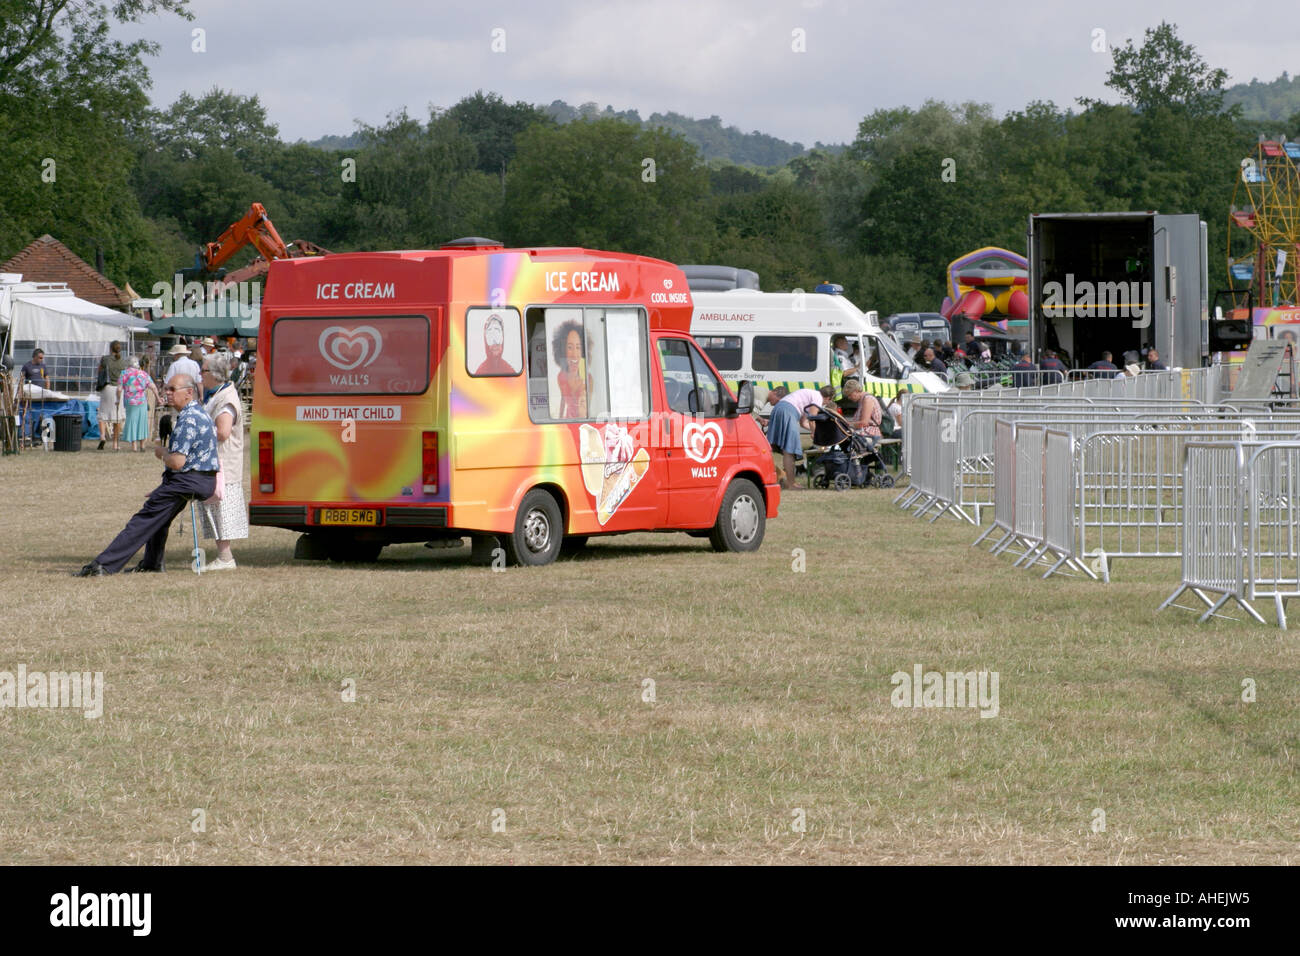 Ice Cream van at an agricultural show in the UK Stock Photo